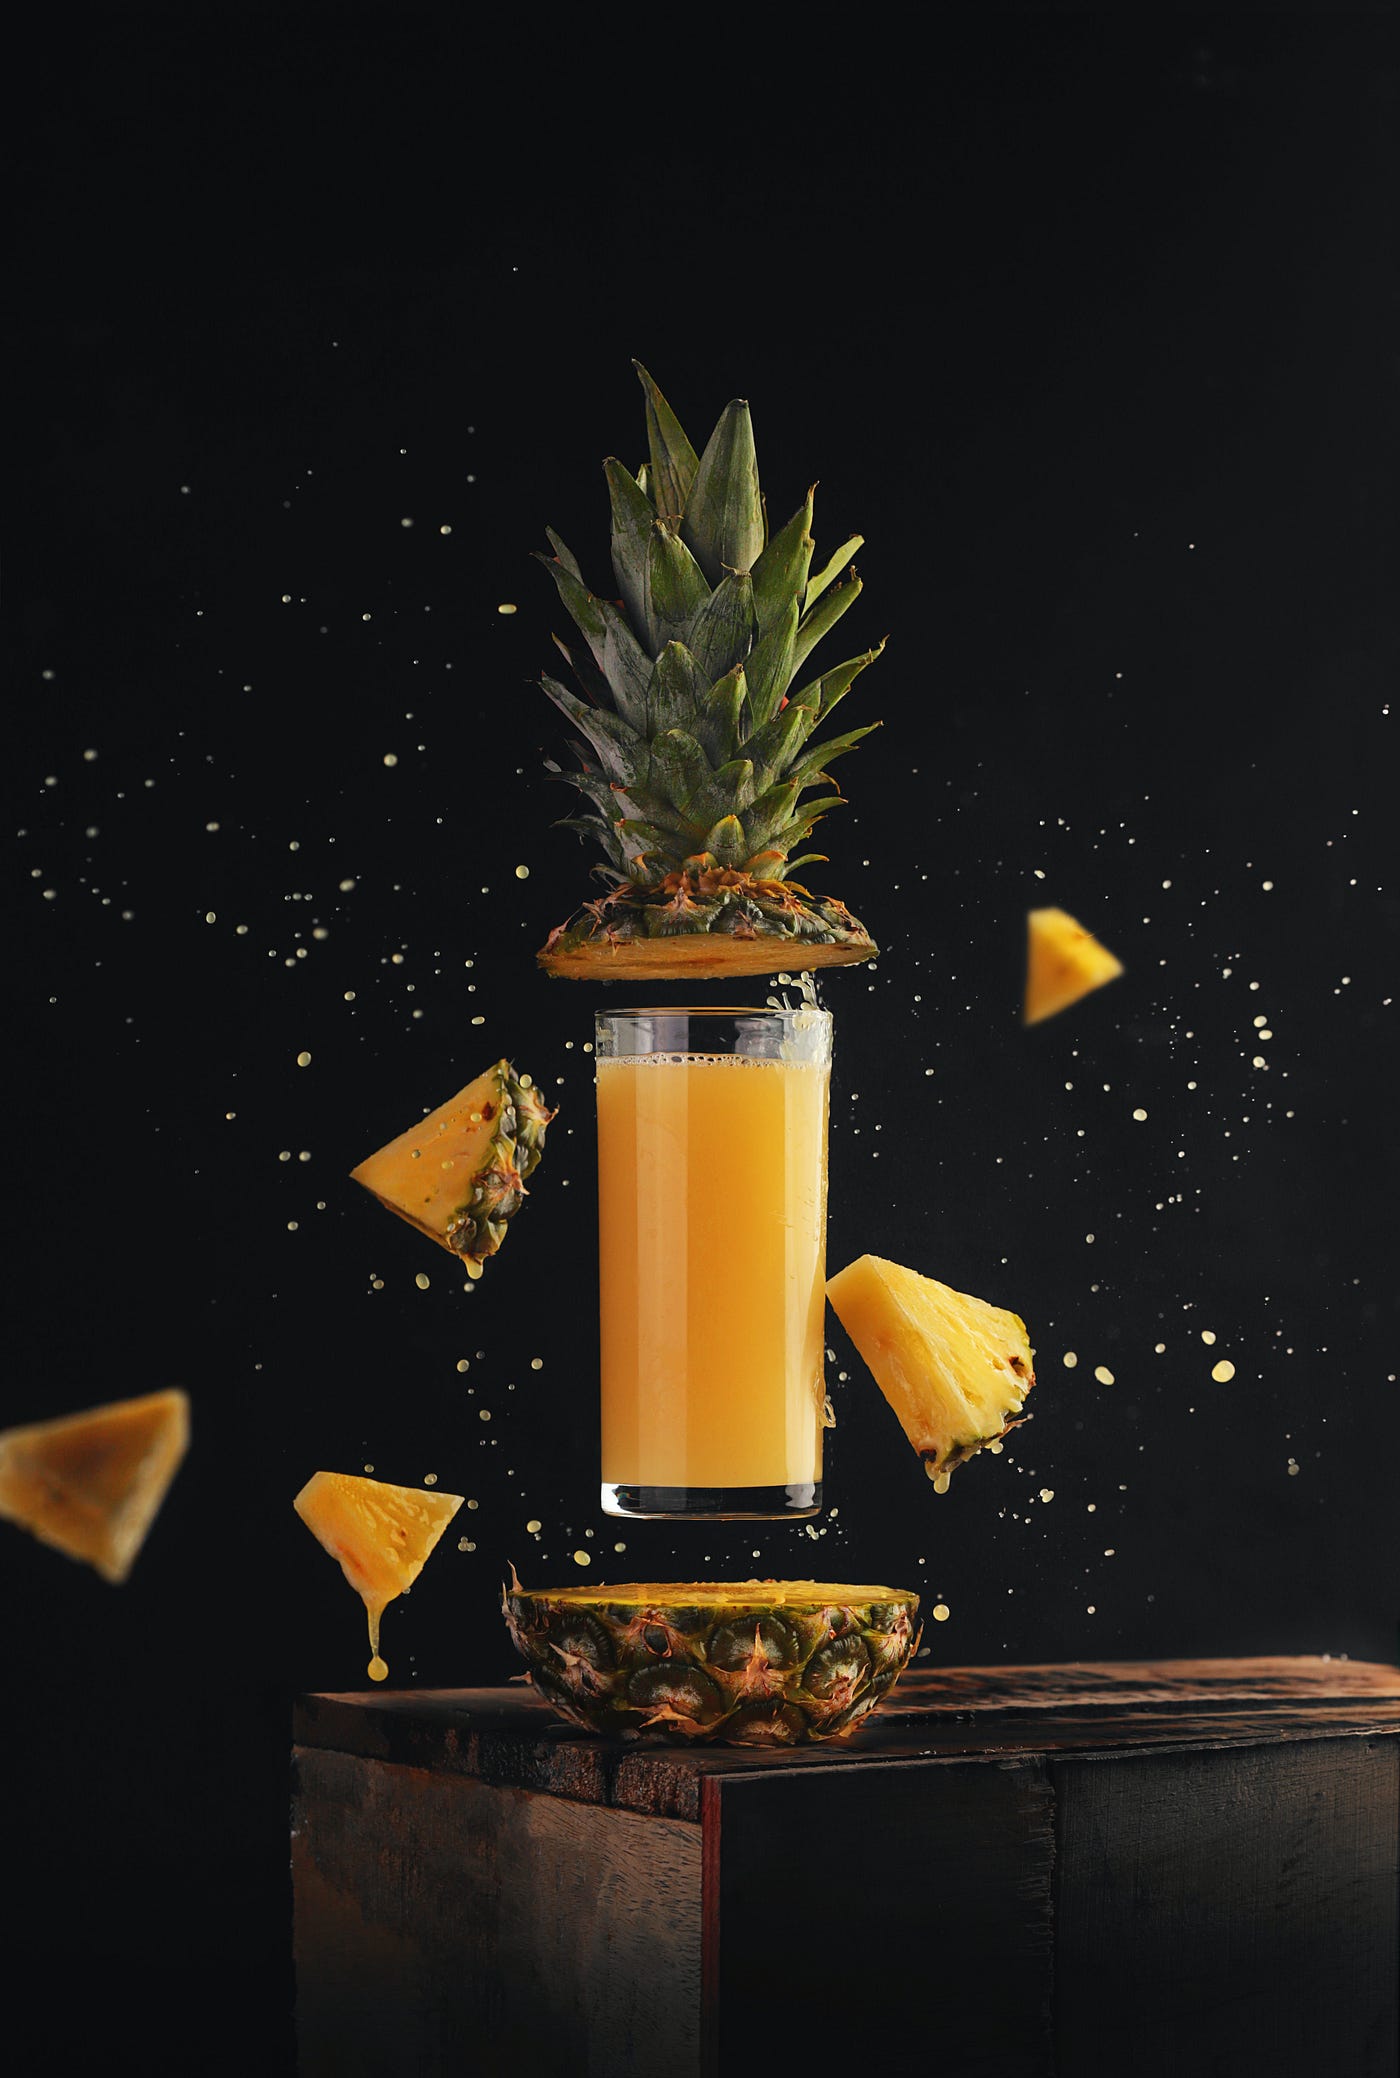 A pineapple sliced in two with a glass of juice in the middle.